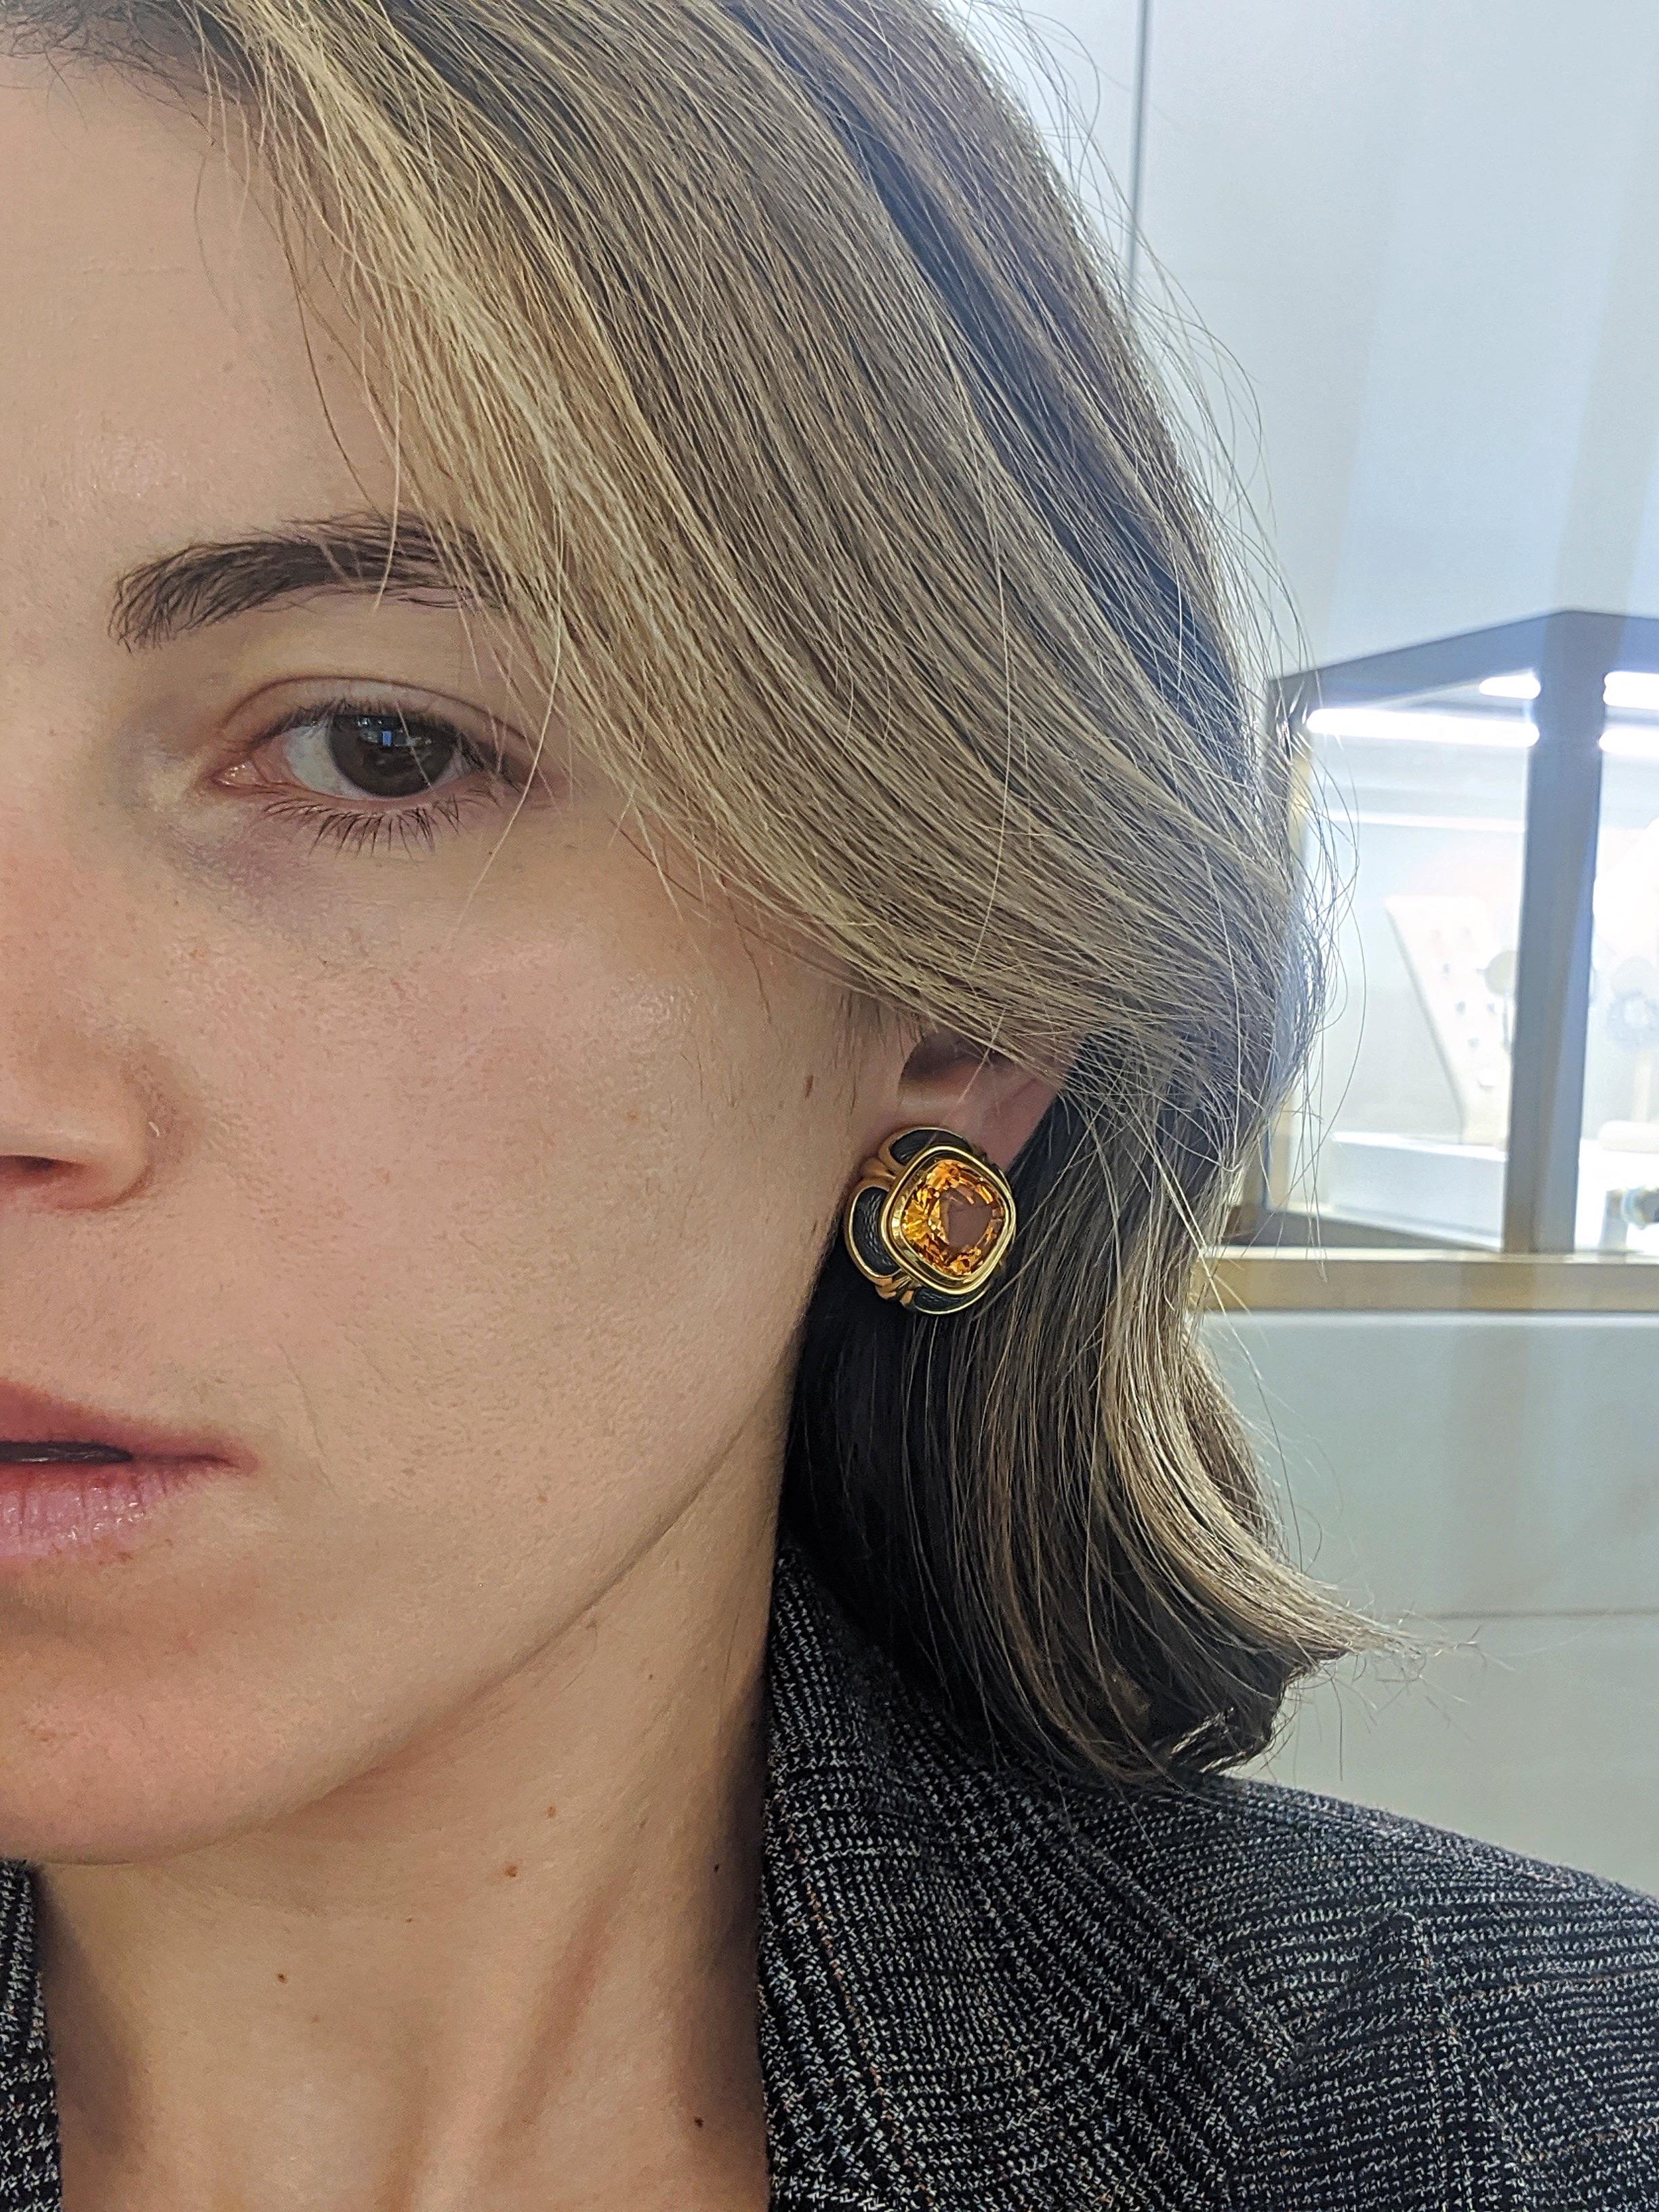 Started in 1967 by Leo and Ginnie de Vroomen the company is known for bold and innovative designs. Distinctive from the start, the renowned company is simply known as de Vroomen.
These 18 karat yellow gold earrings are the perfect example of de